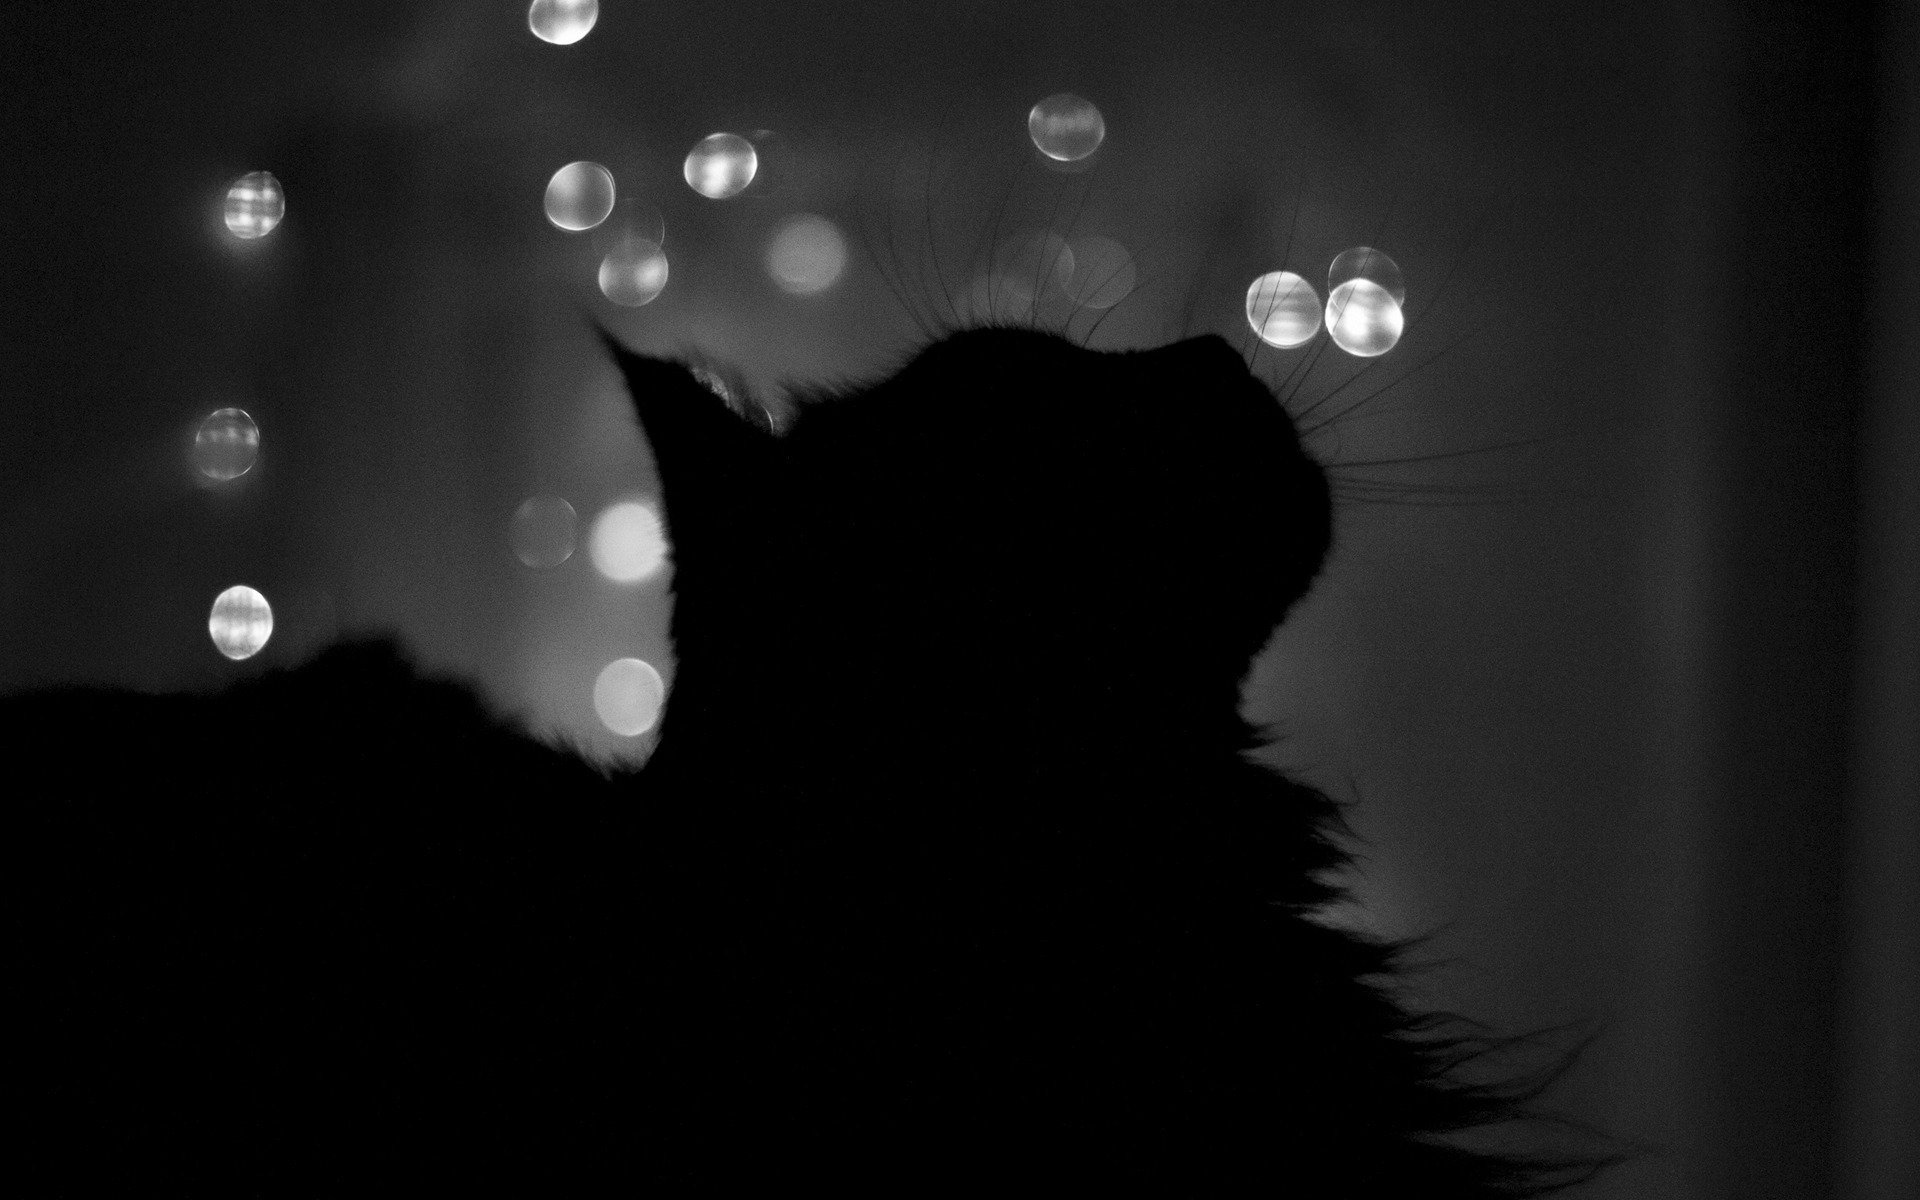 Black cat in shade wallpapers and images   wallpapers pictures